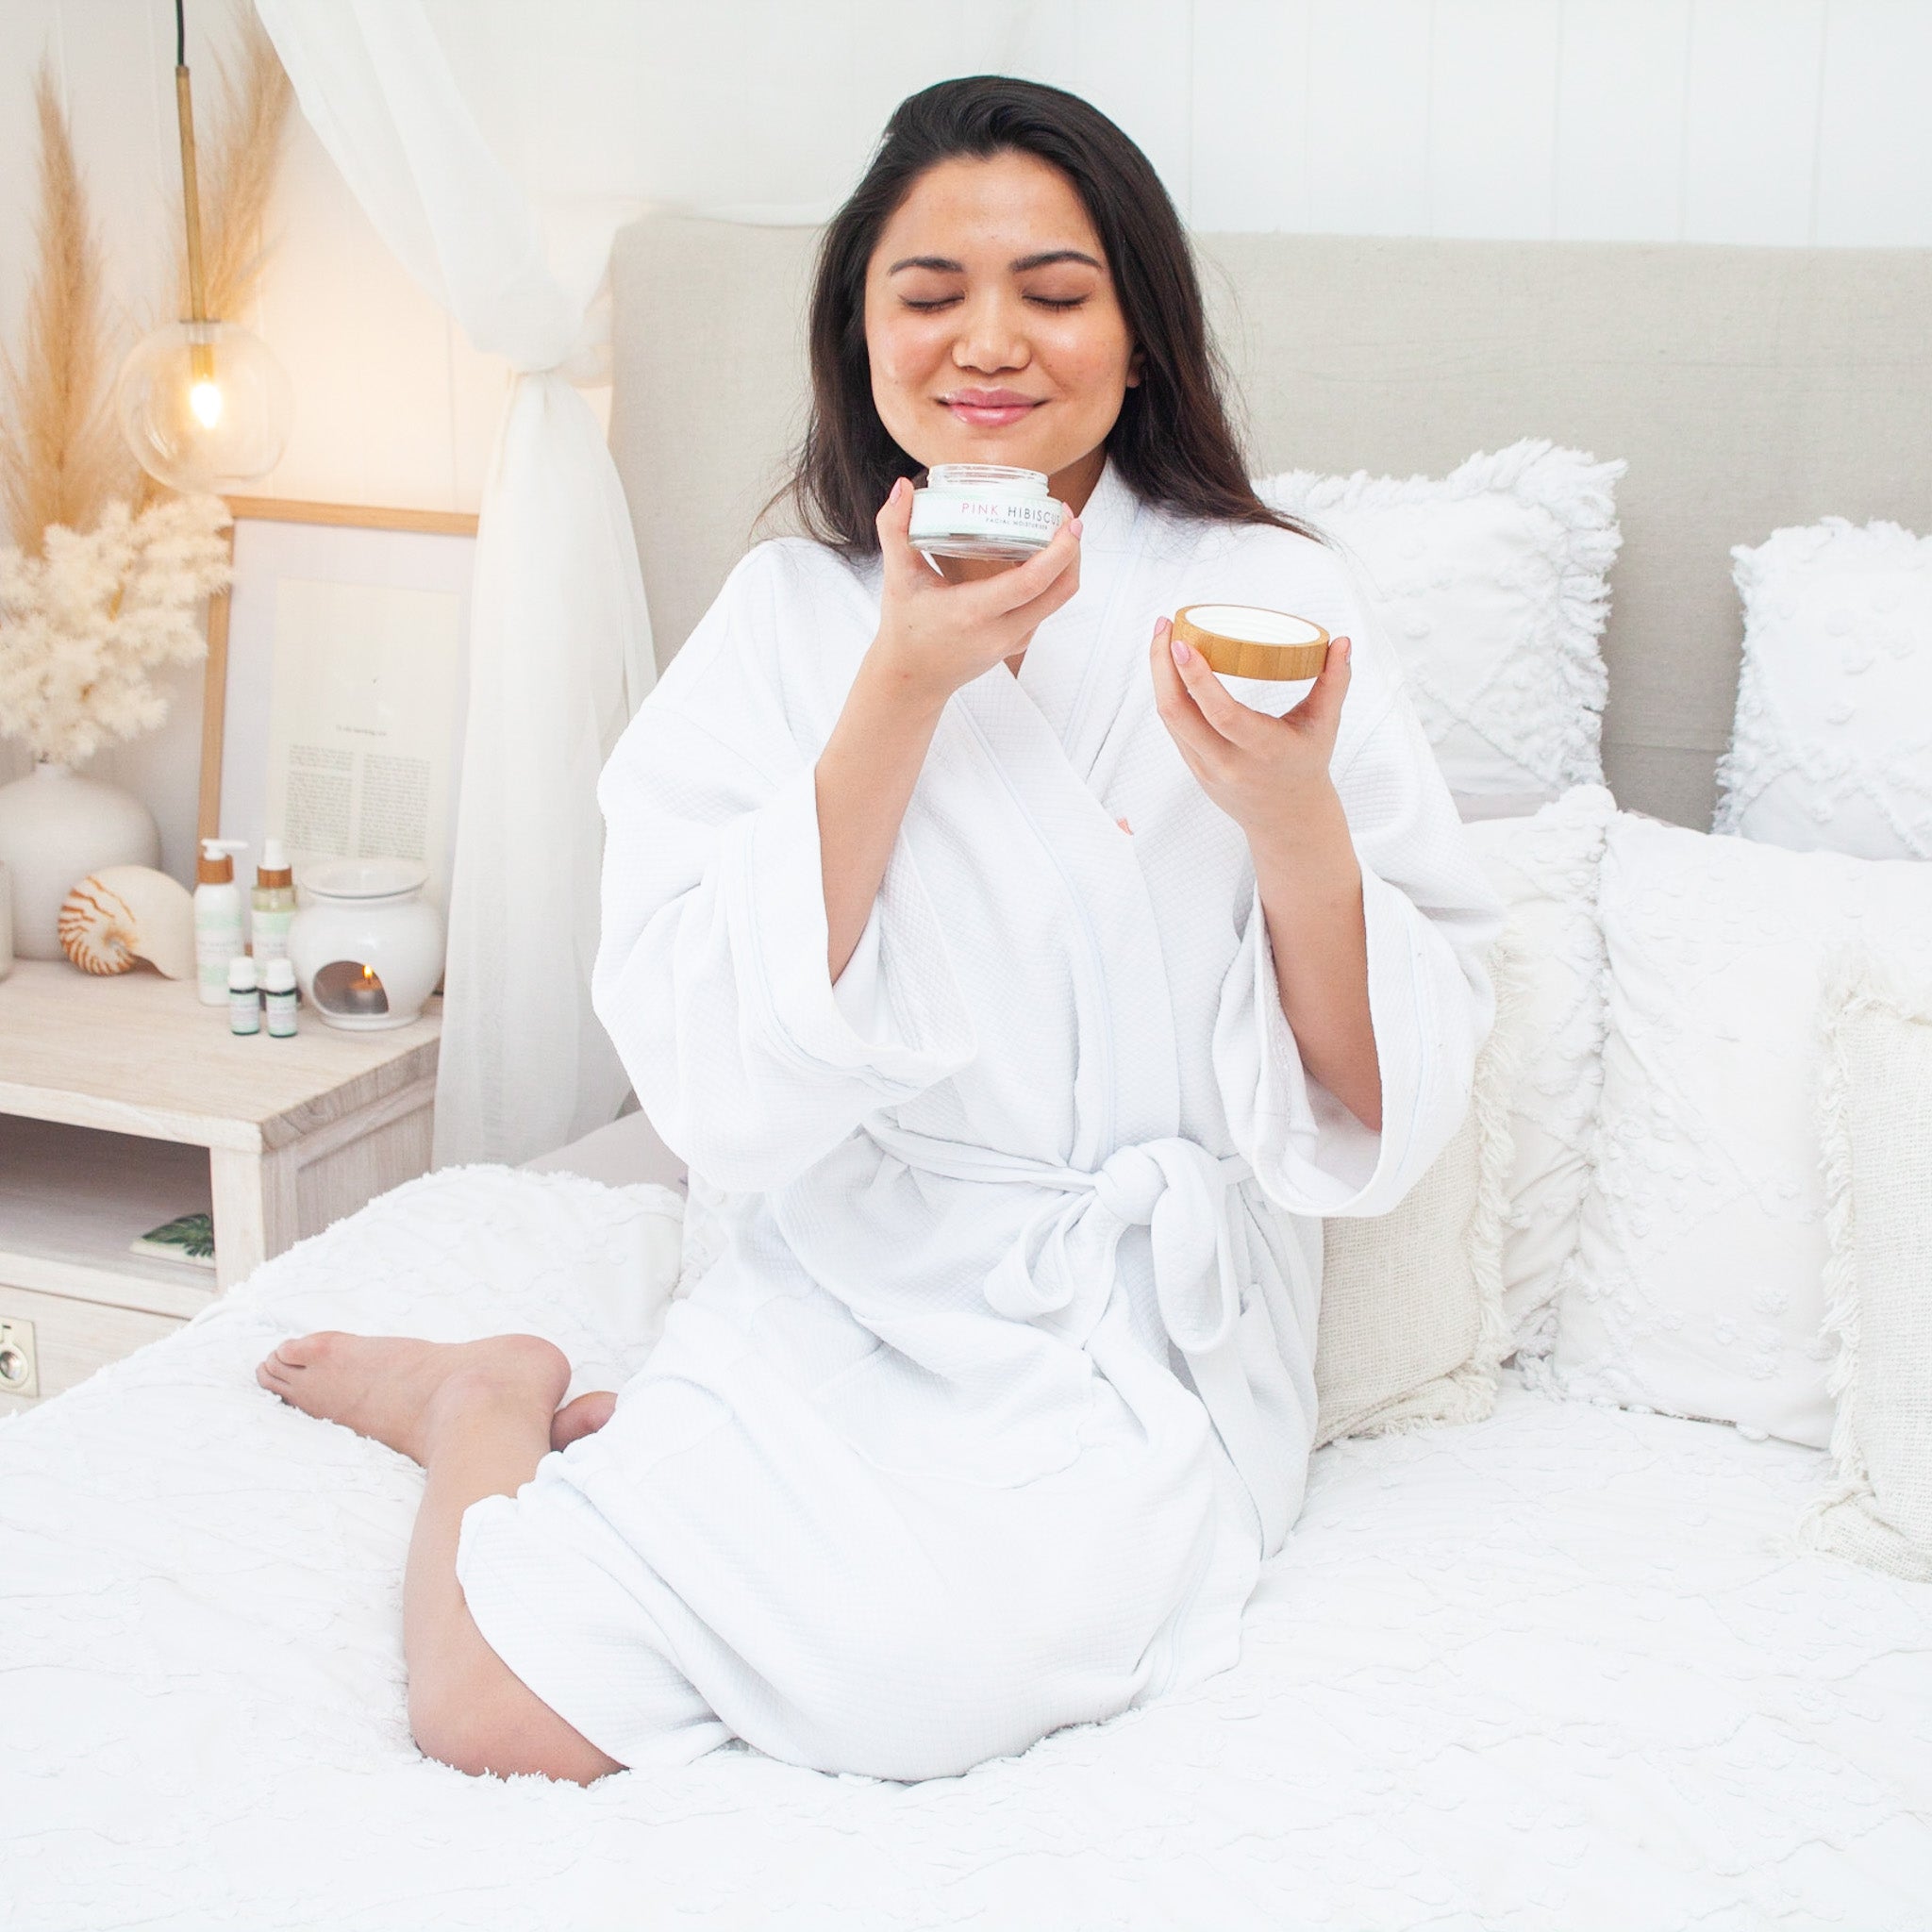 Filipino woman smelling Pink Hibiscus Facial Moisturiser in Hamptons-style bed wearing a white robe